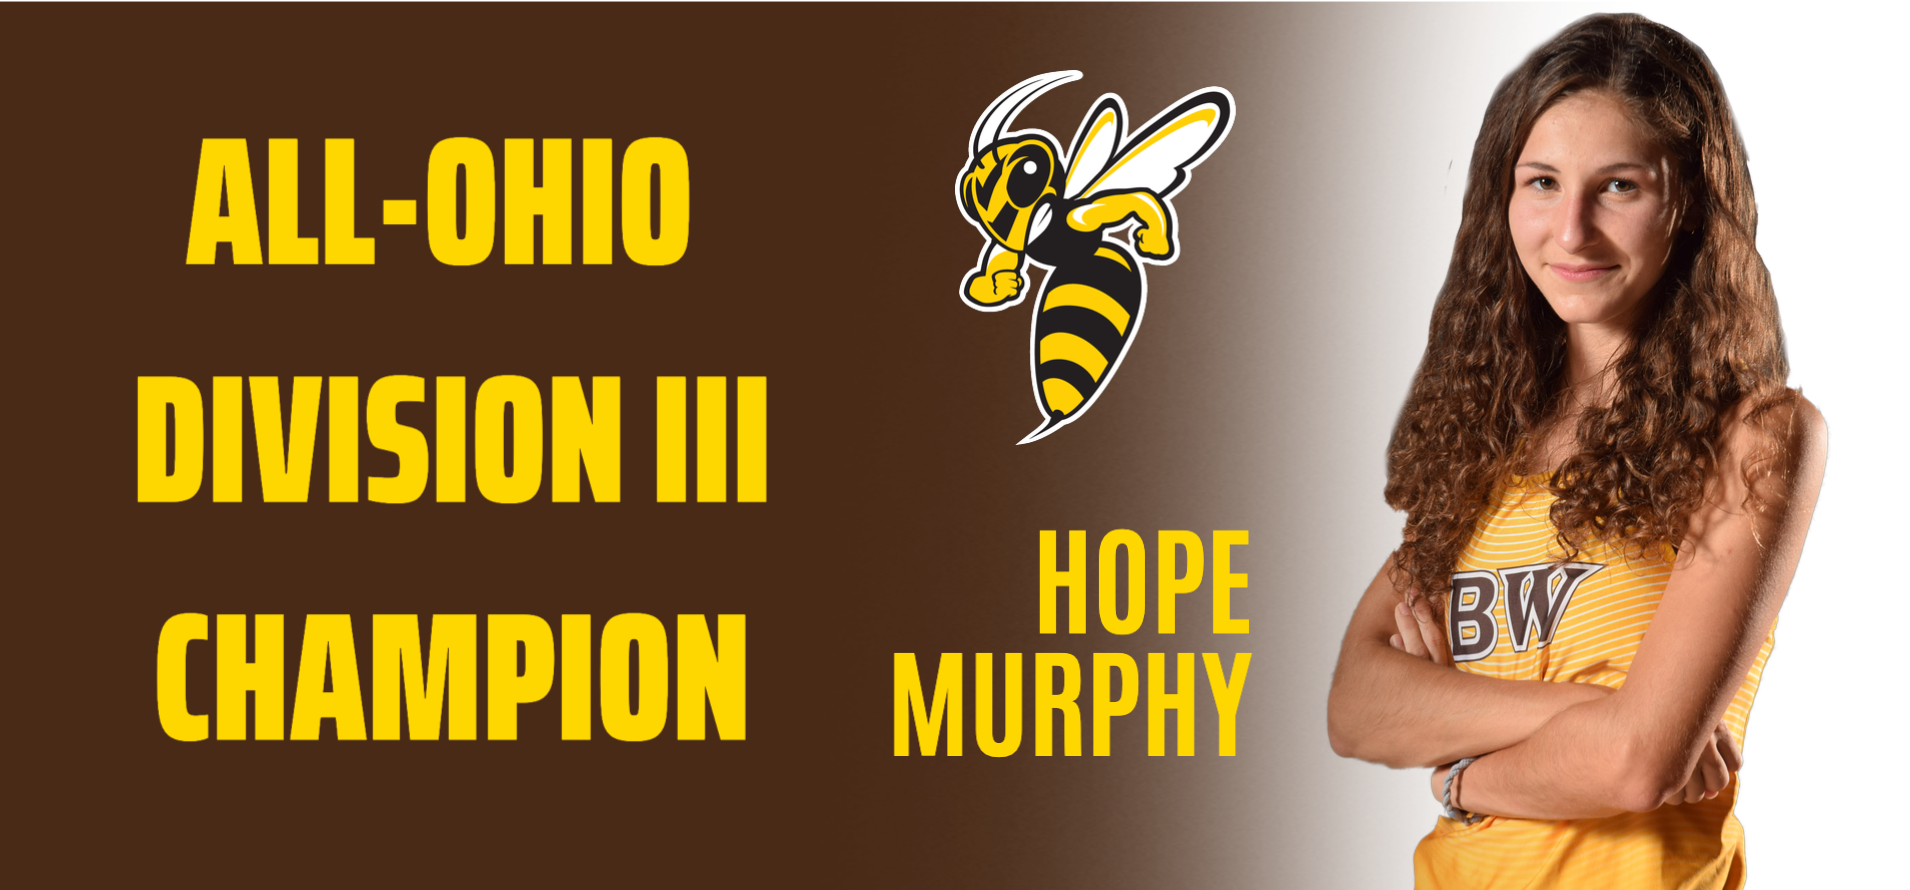 Murphy Wins All-Ohio Division III Championship; Women's Cross Country Placed Fourth